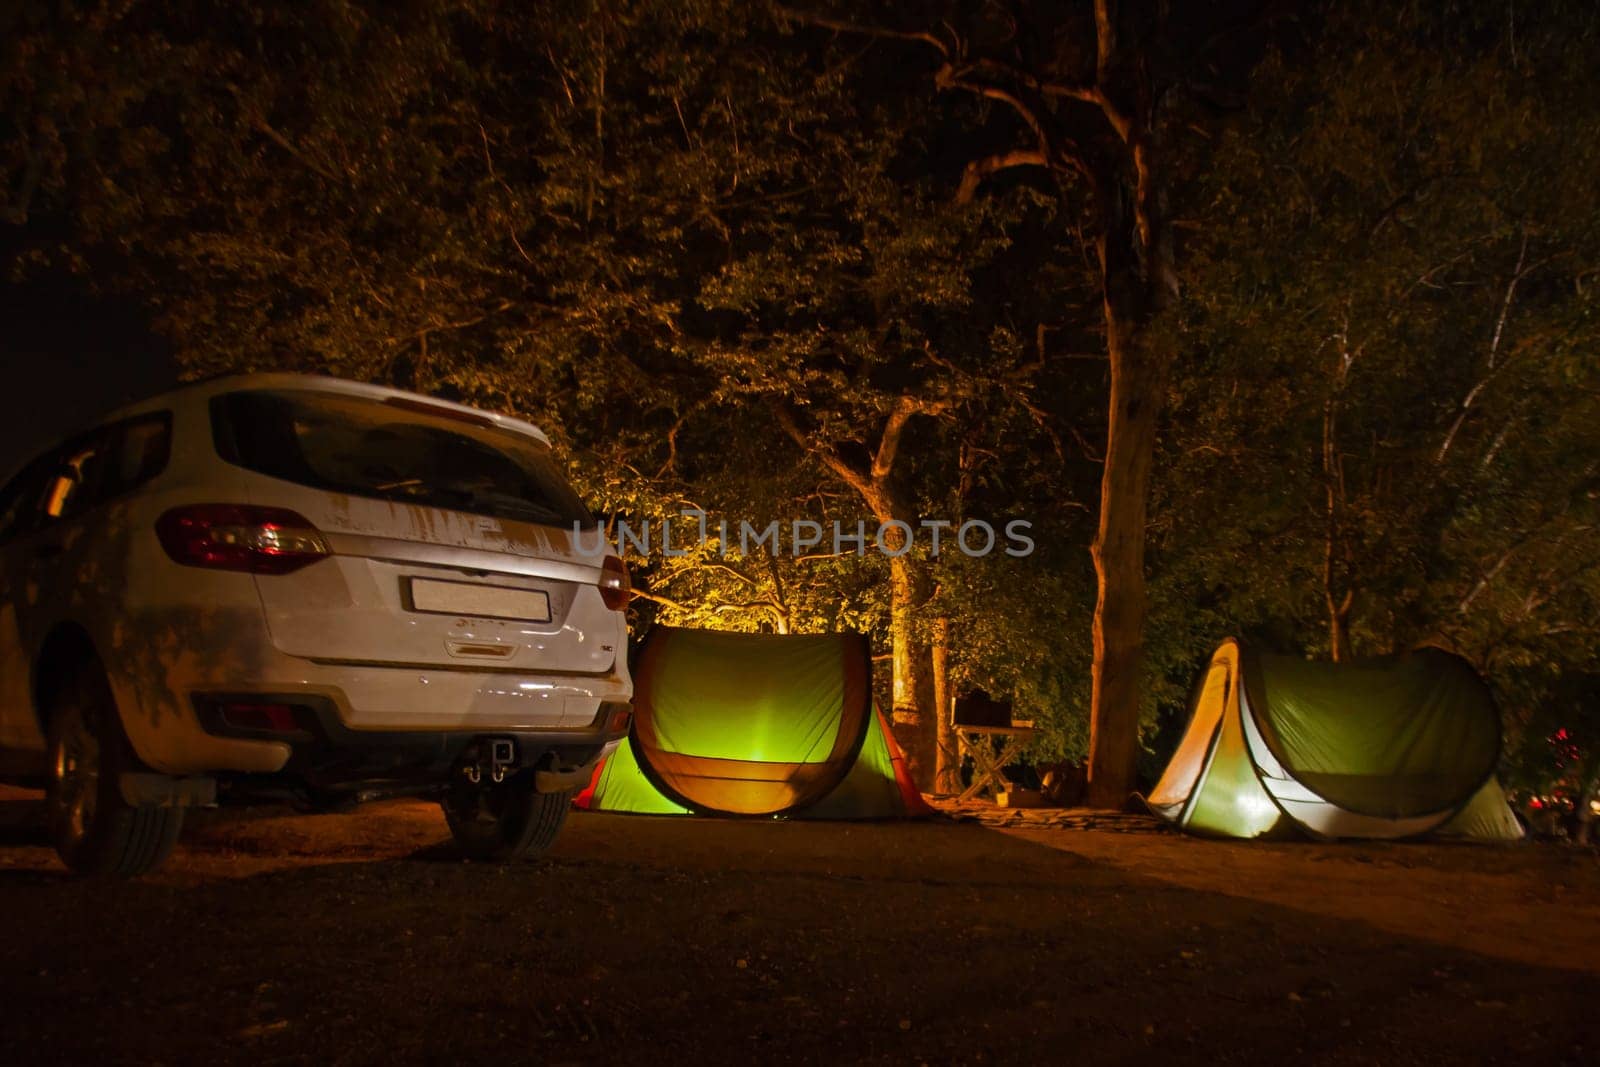 Night time campsite 10666 by kobus_peche